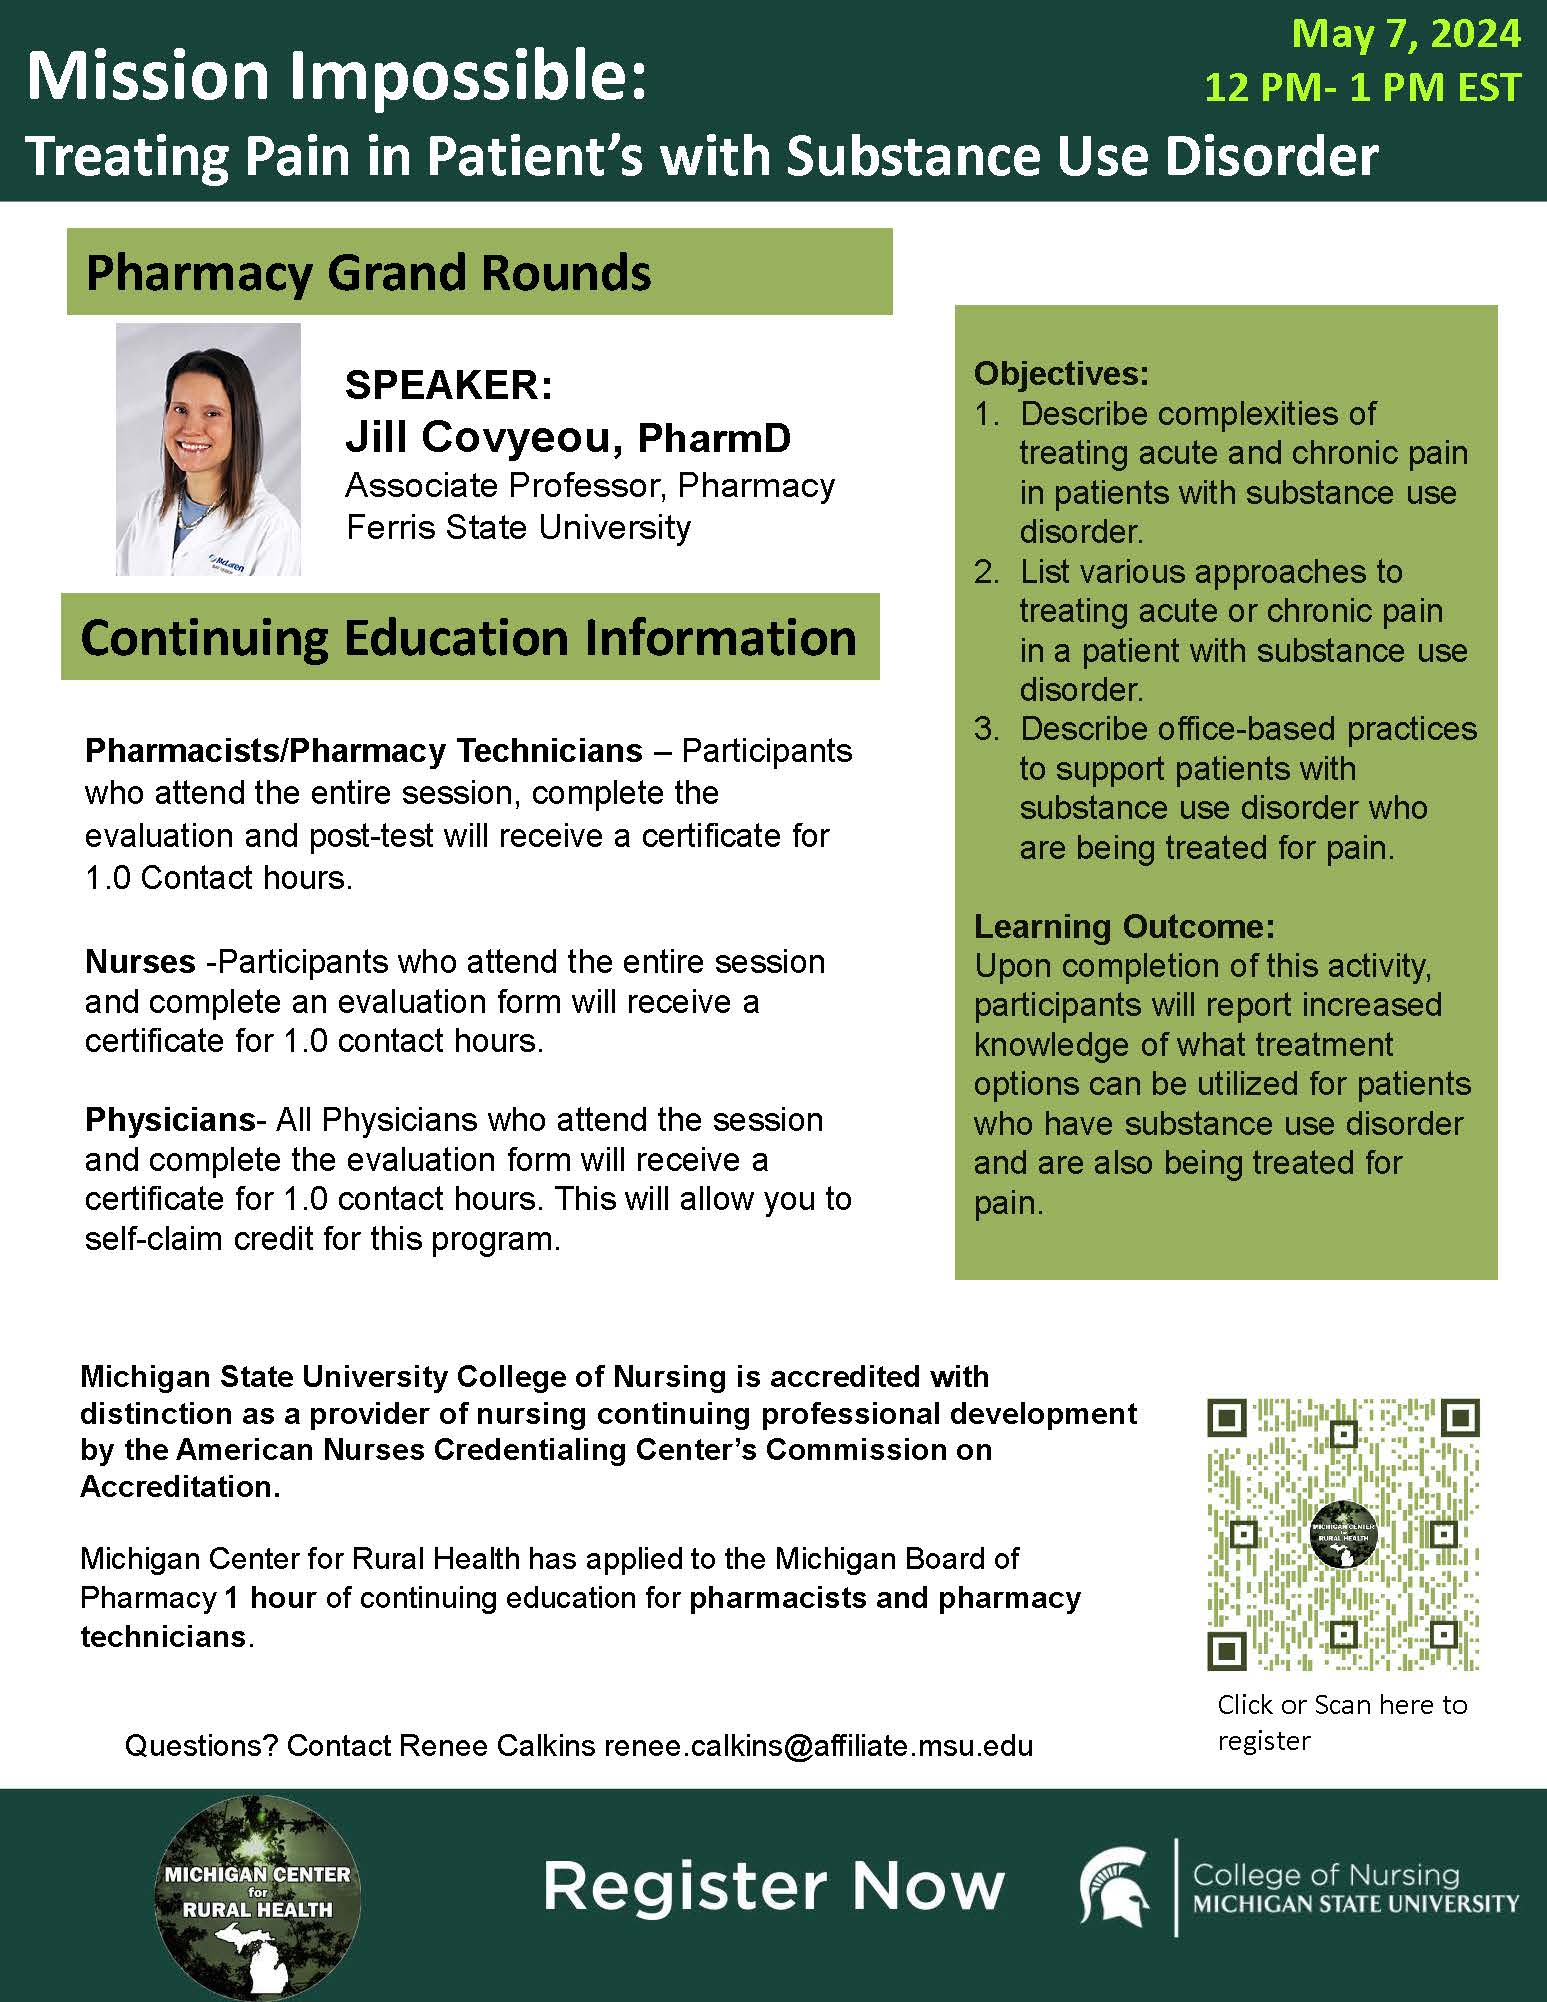 May 7th Pharmacy Grand Rounds Flyer 